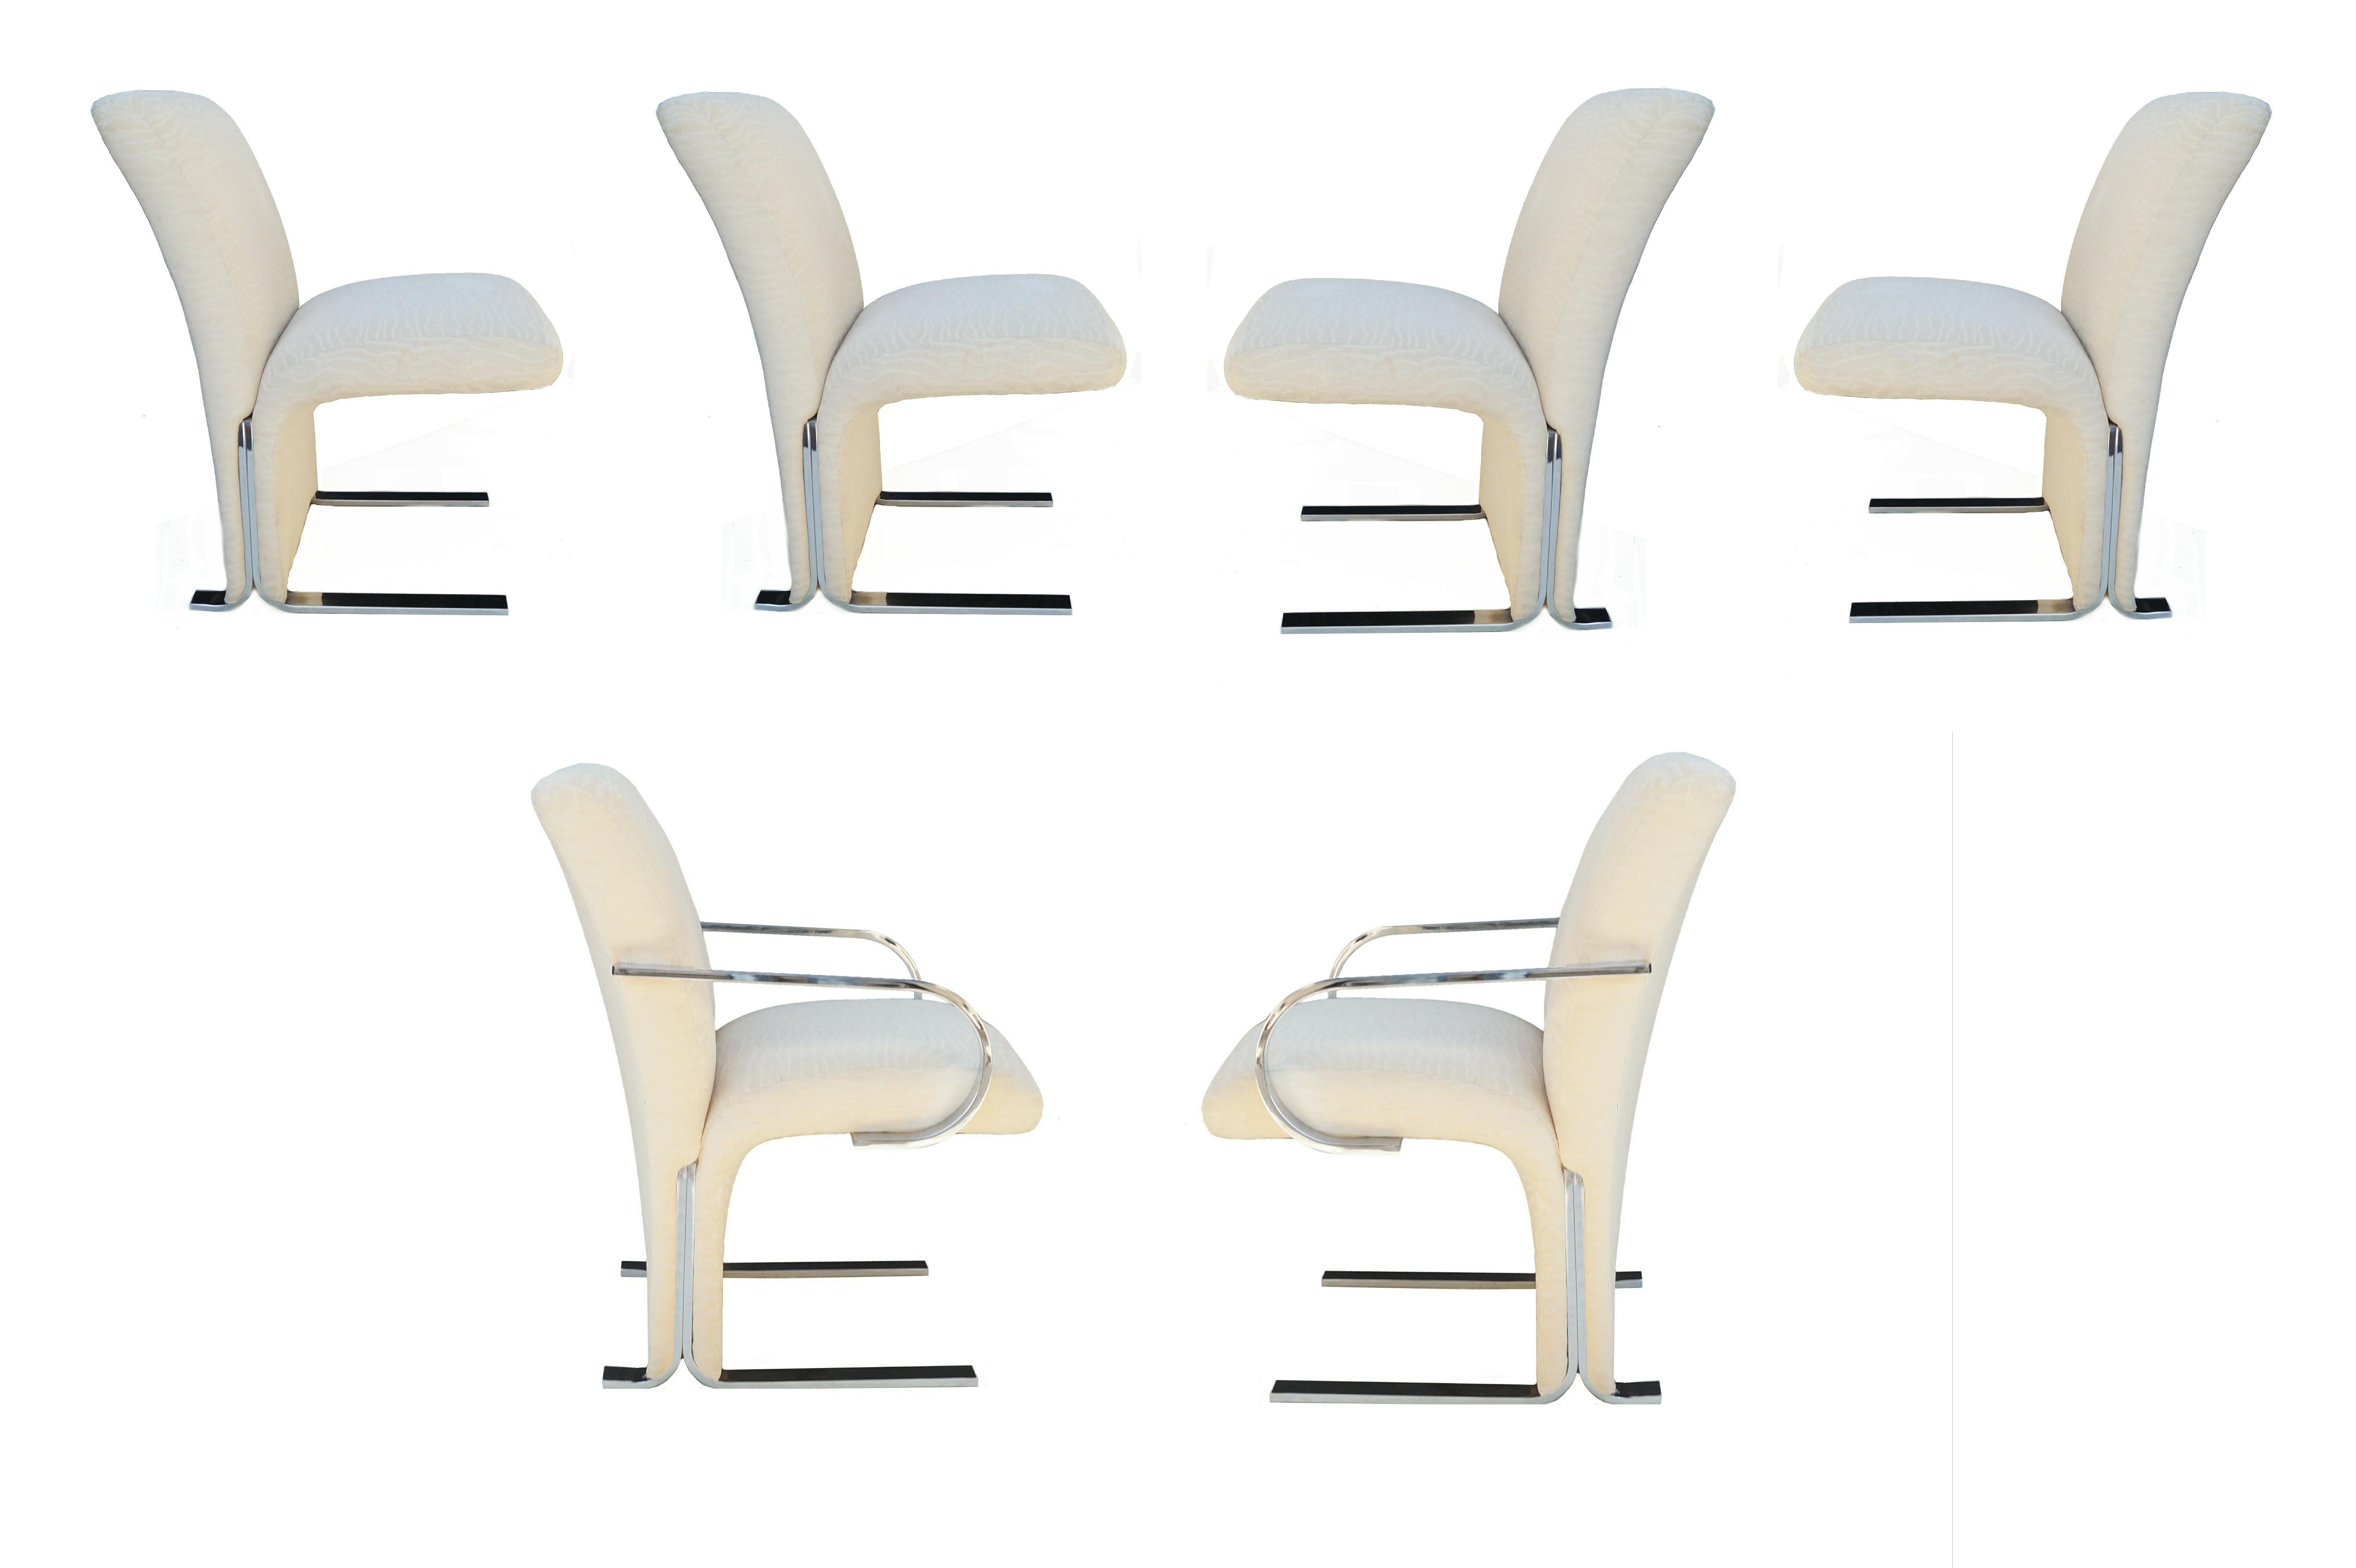 The size shown is for the 4 side chairs. The 2 arm head chairs measure 33.50